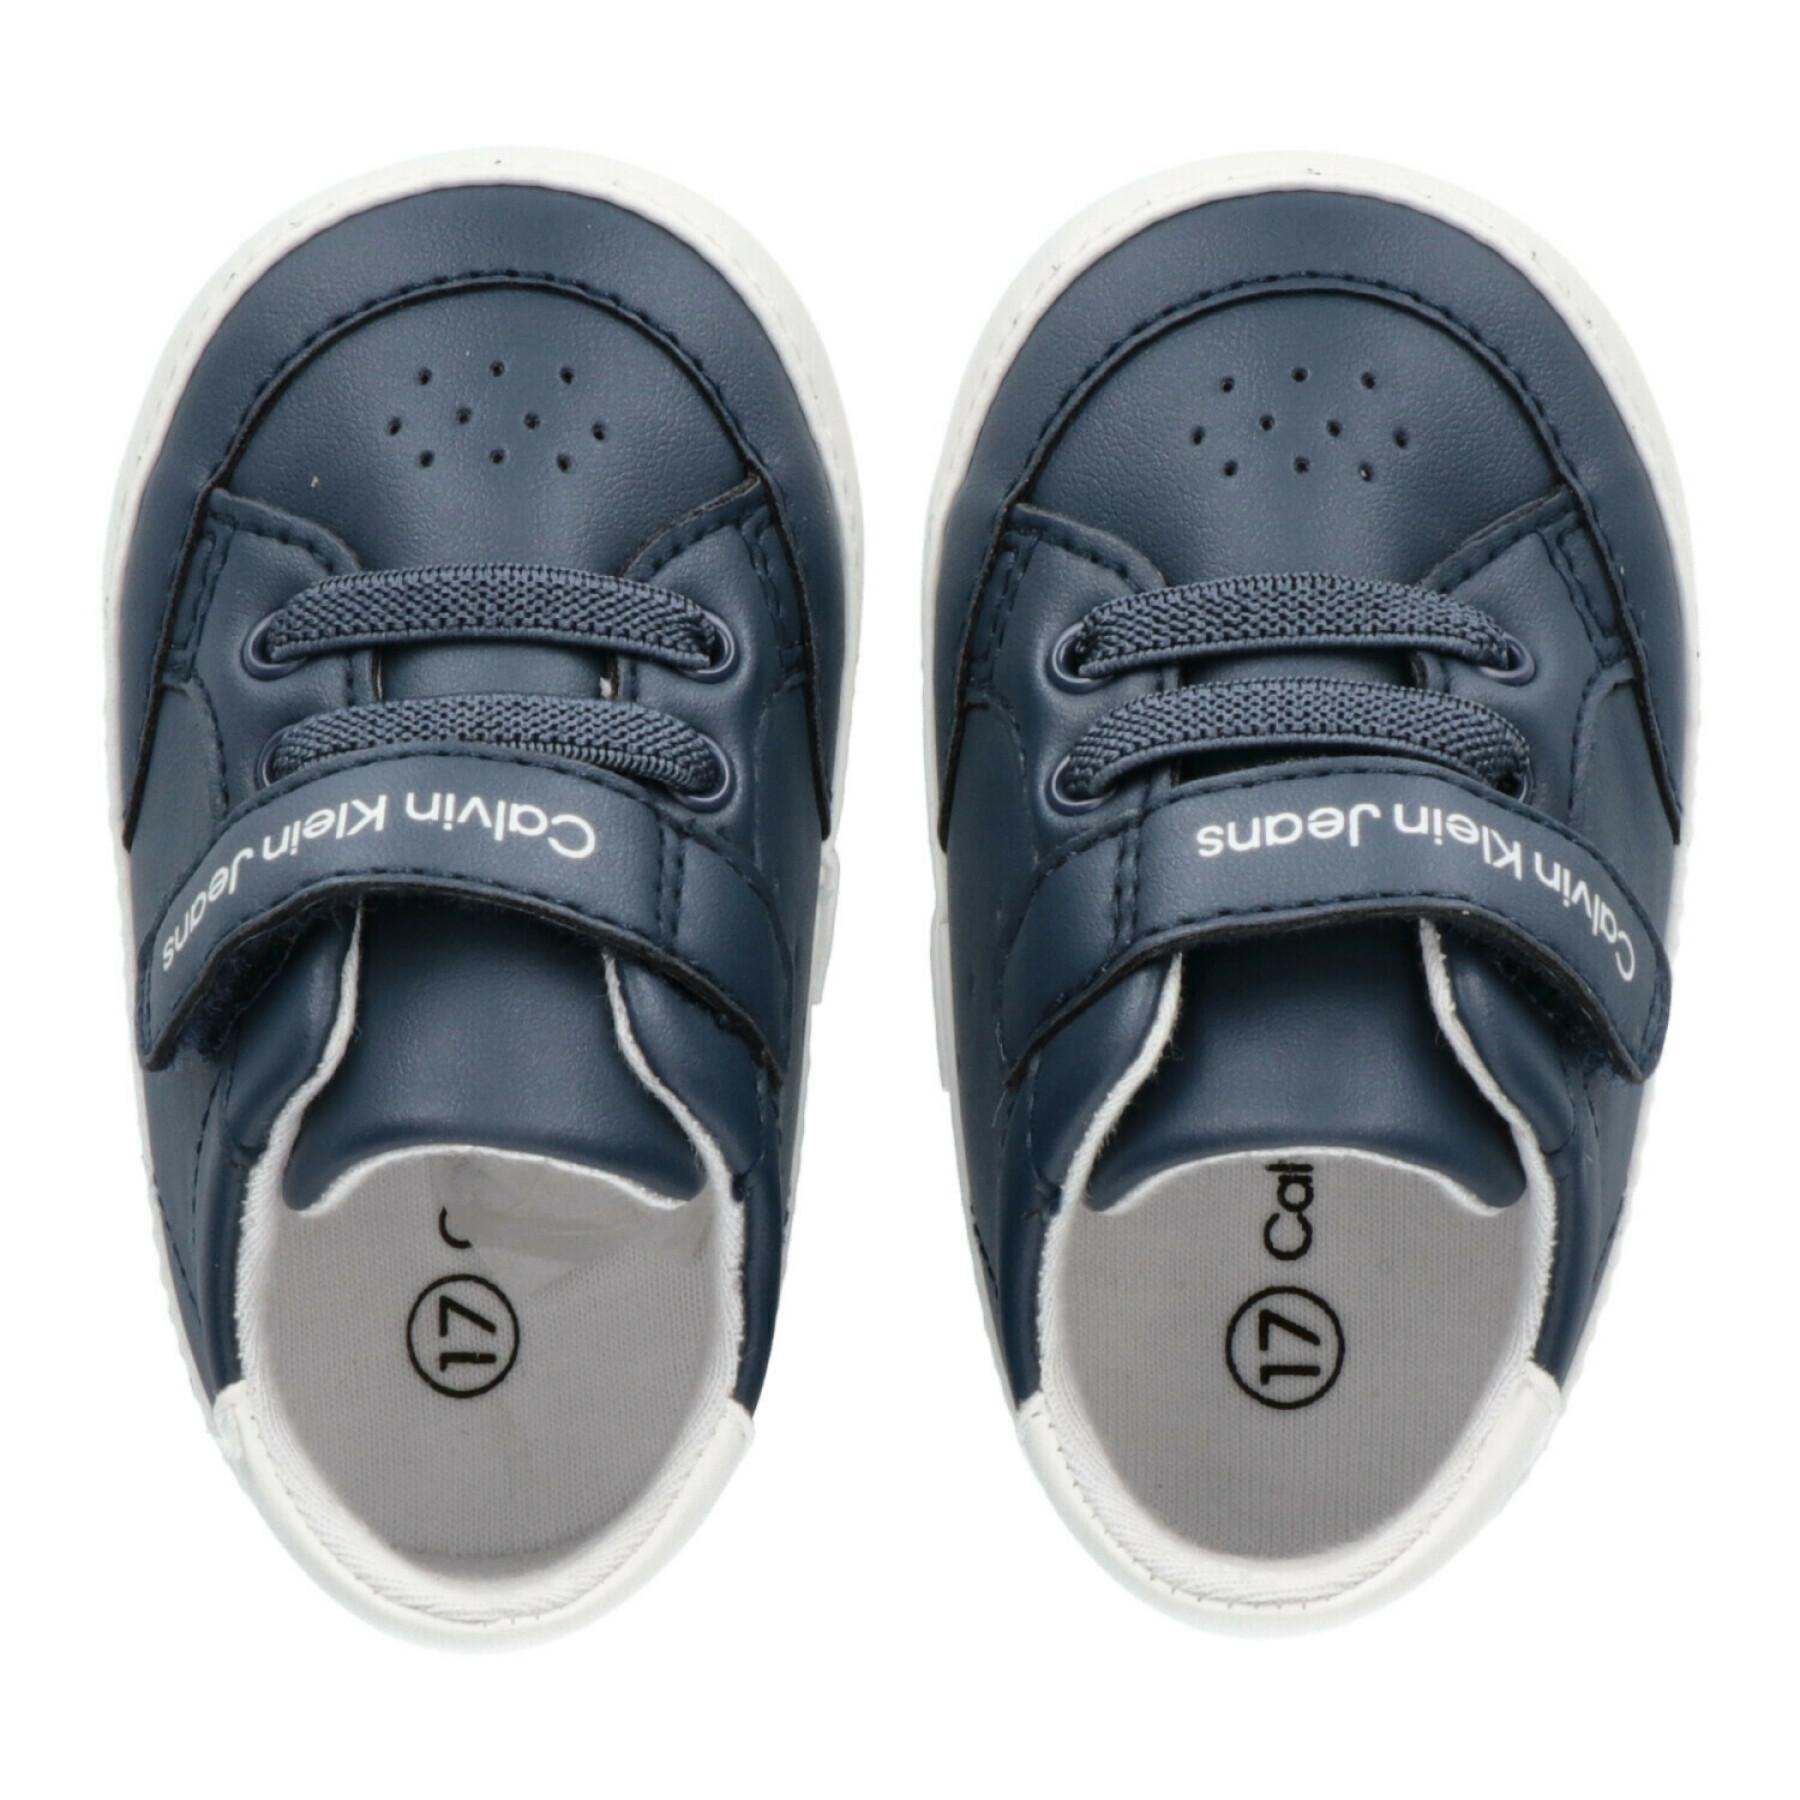 Baby shoes Calvin Klein Jeans Lace-up